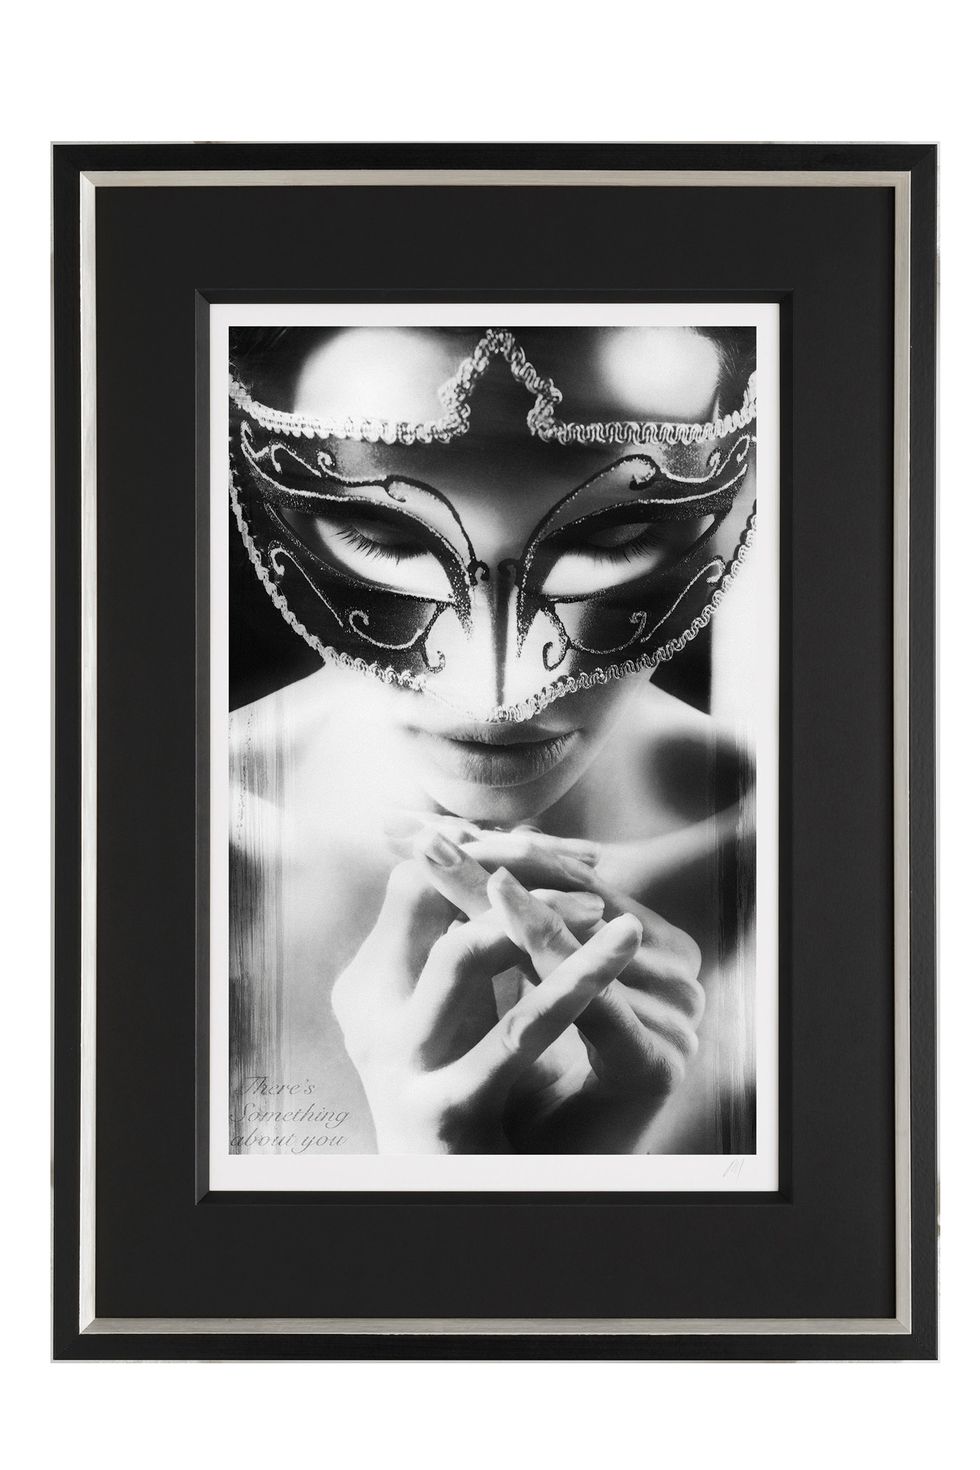 El James launches 50 shades of grey fine art collection